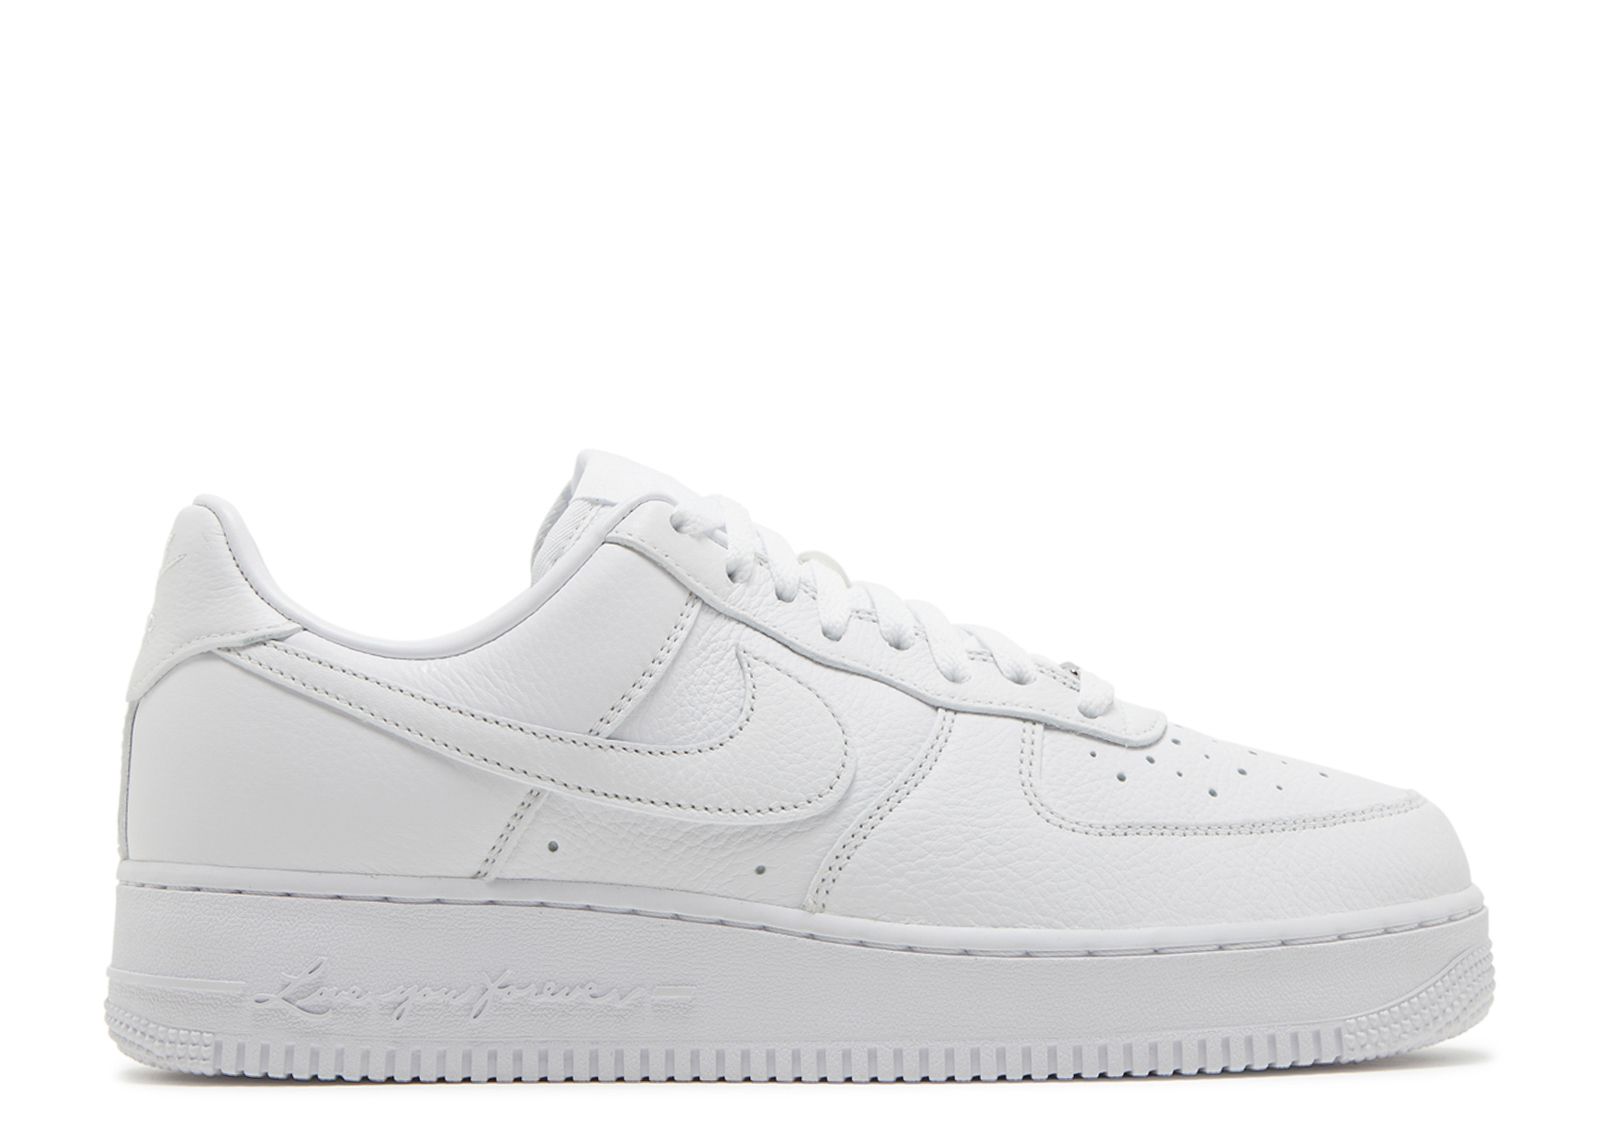 NOCTA Air Force 1 'White' (CZ8065-100) Release Date. Nike SNKRS